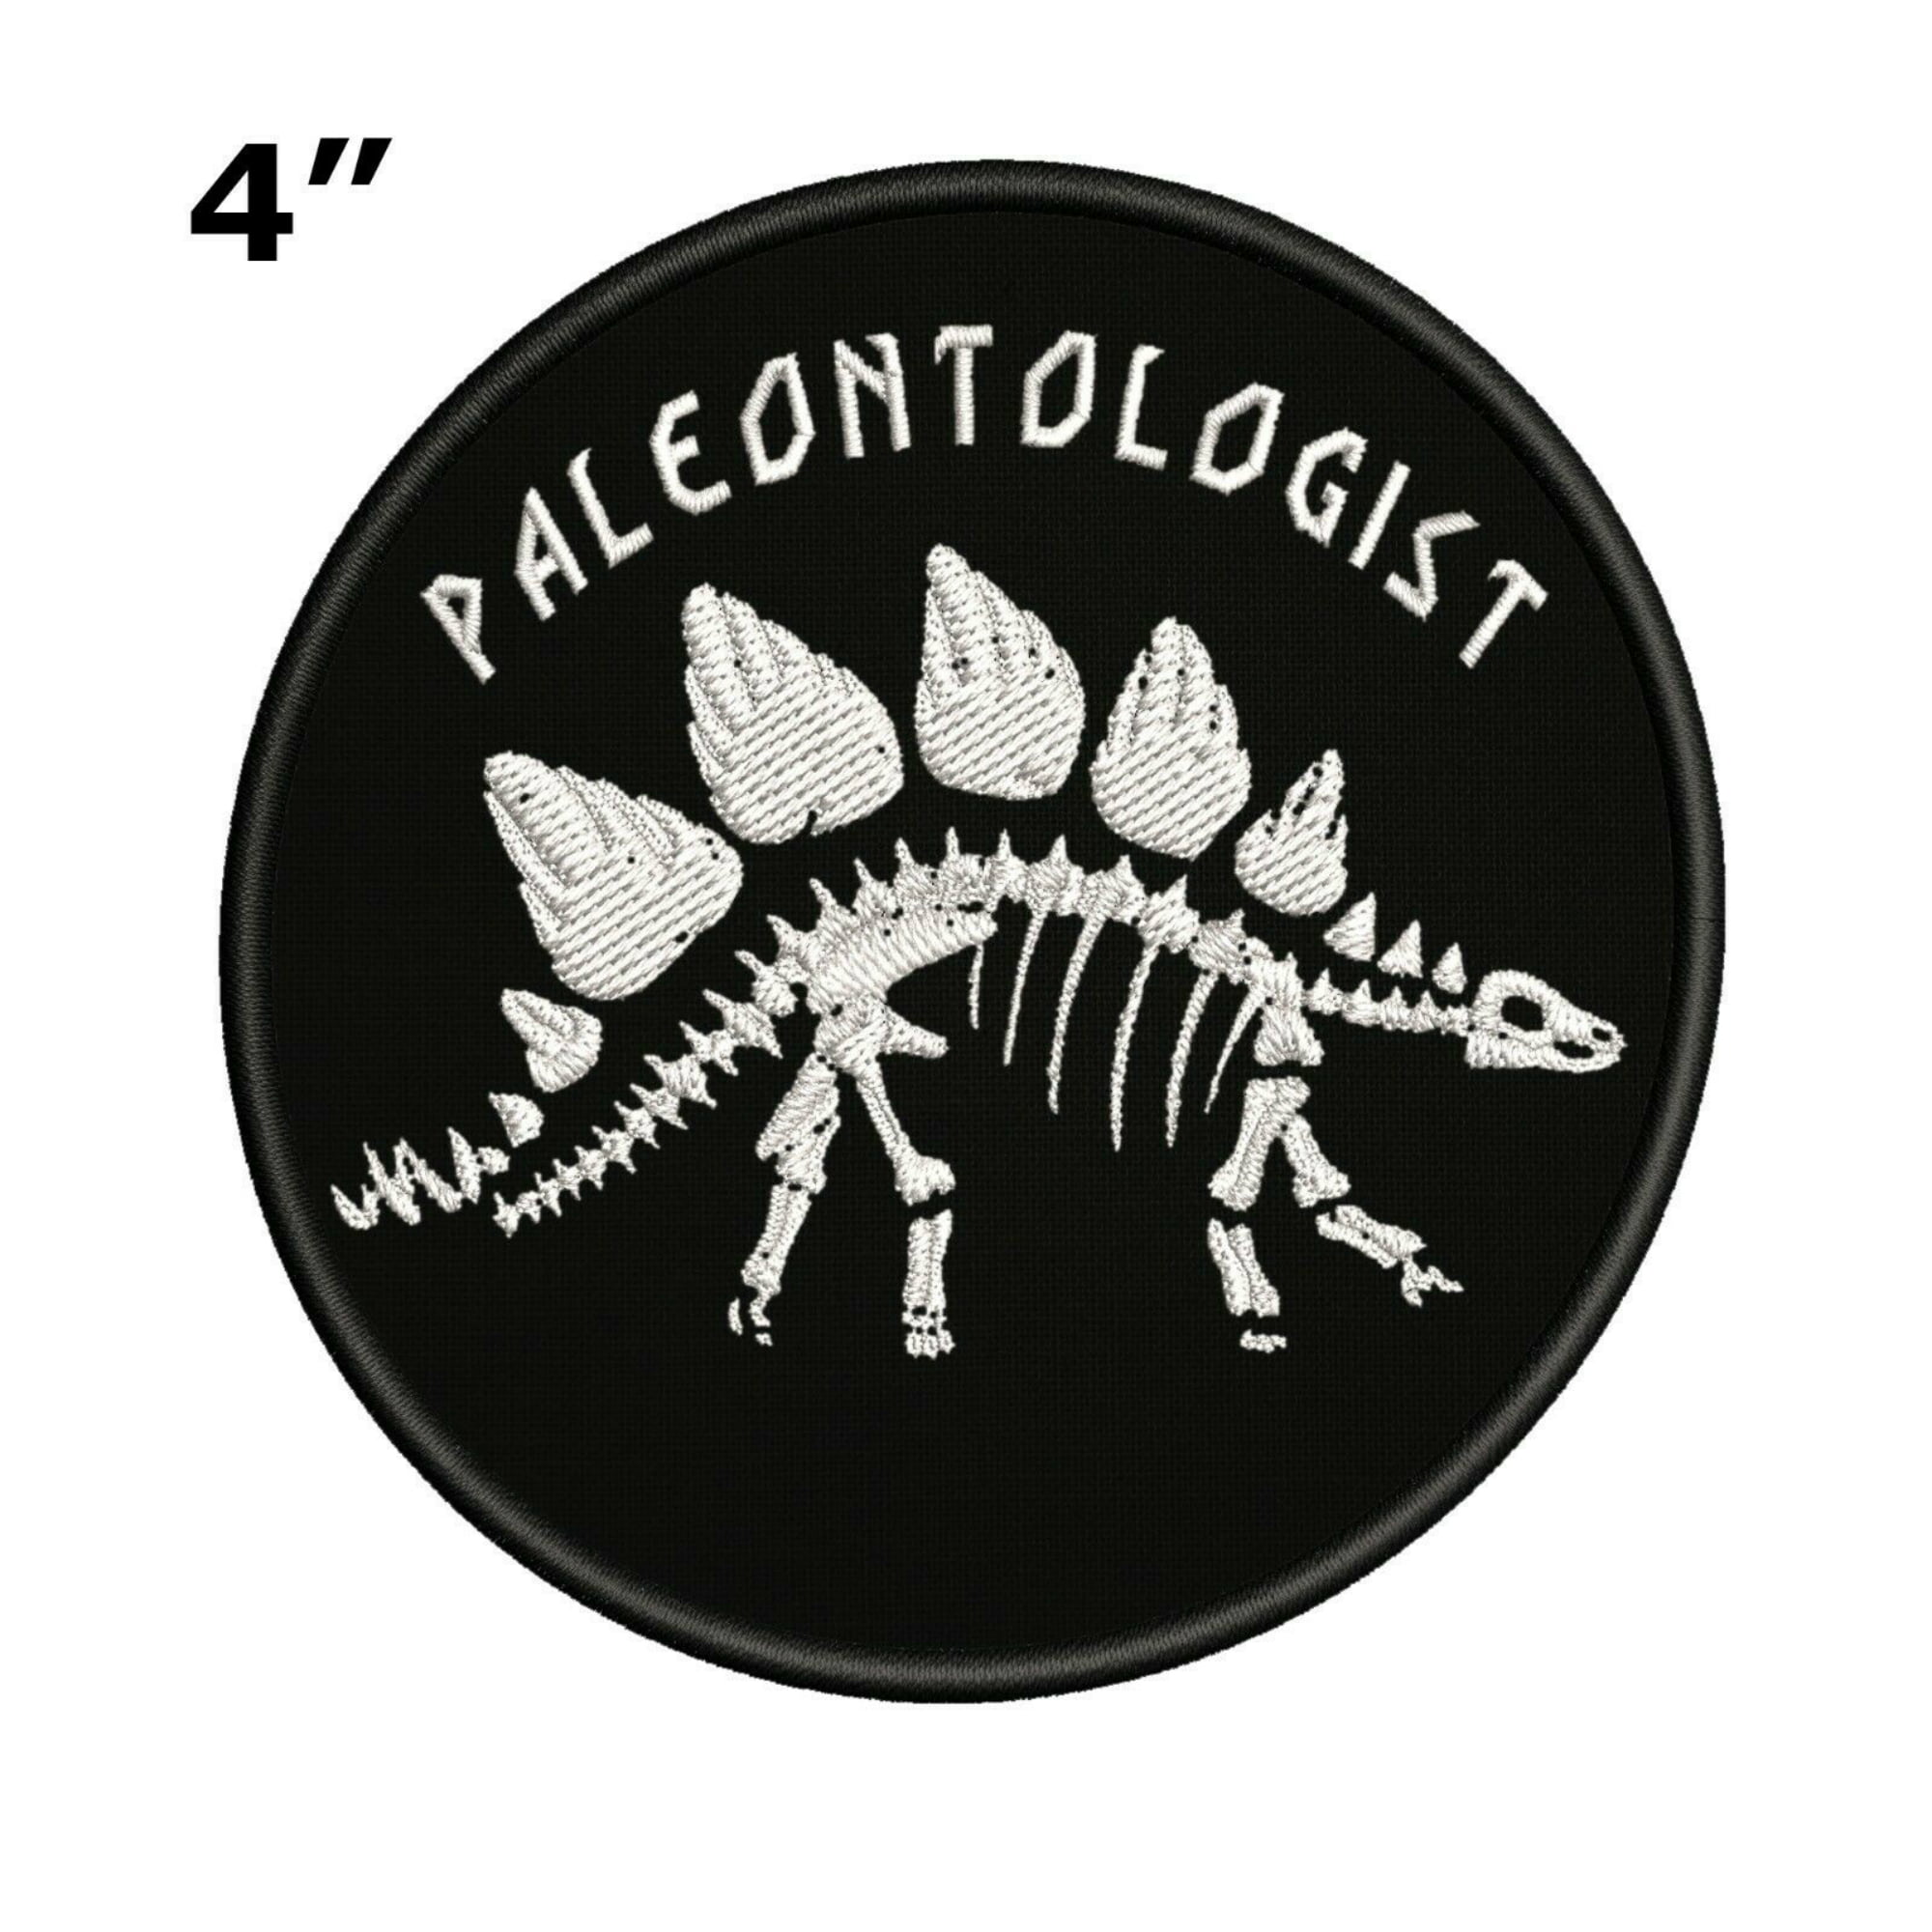 Jurassic Pals Animal Embroidery Cute Iron-on Patch, Dino Stegosaurus  Brontosaurus Triceratops Patches, Embroidered Dinosaurs 